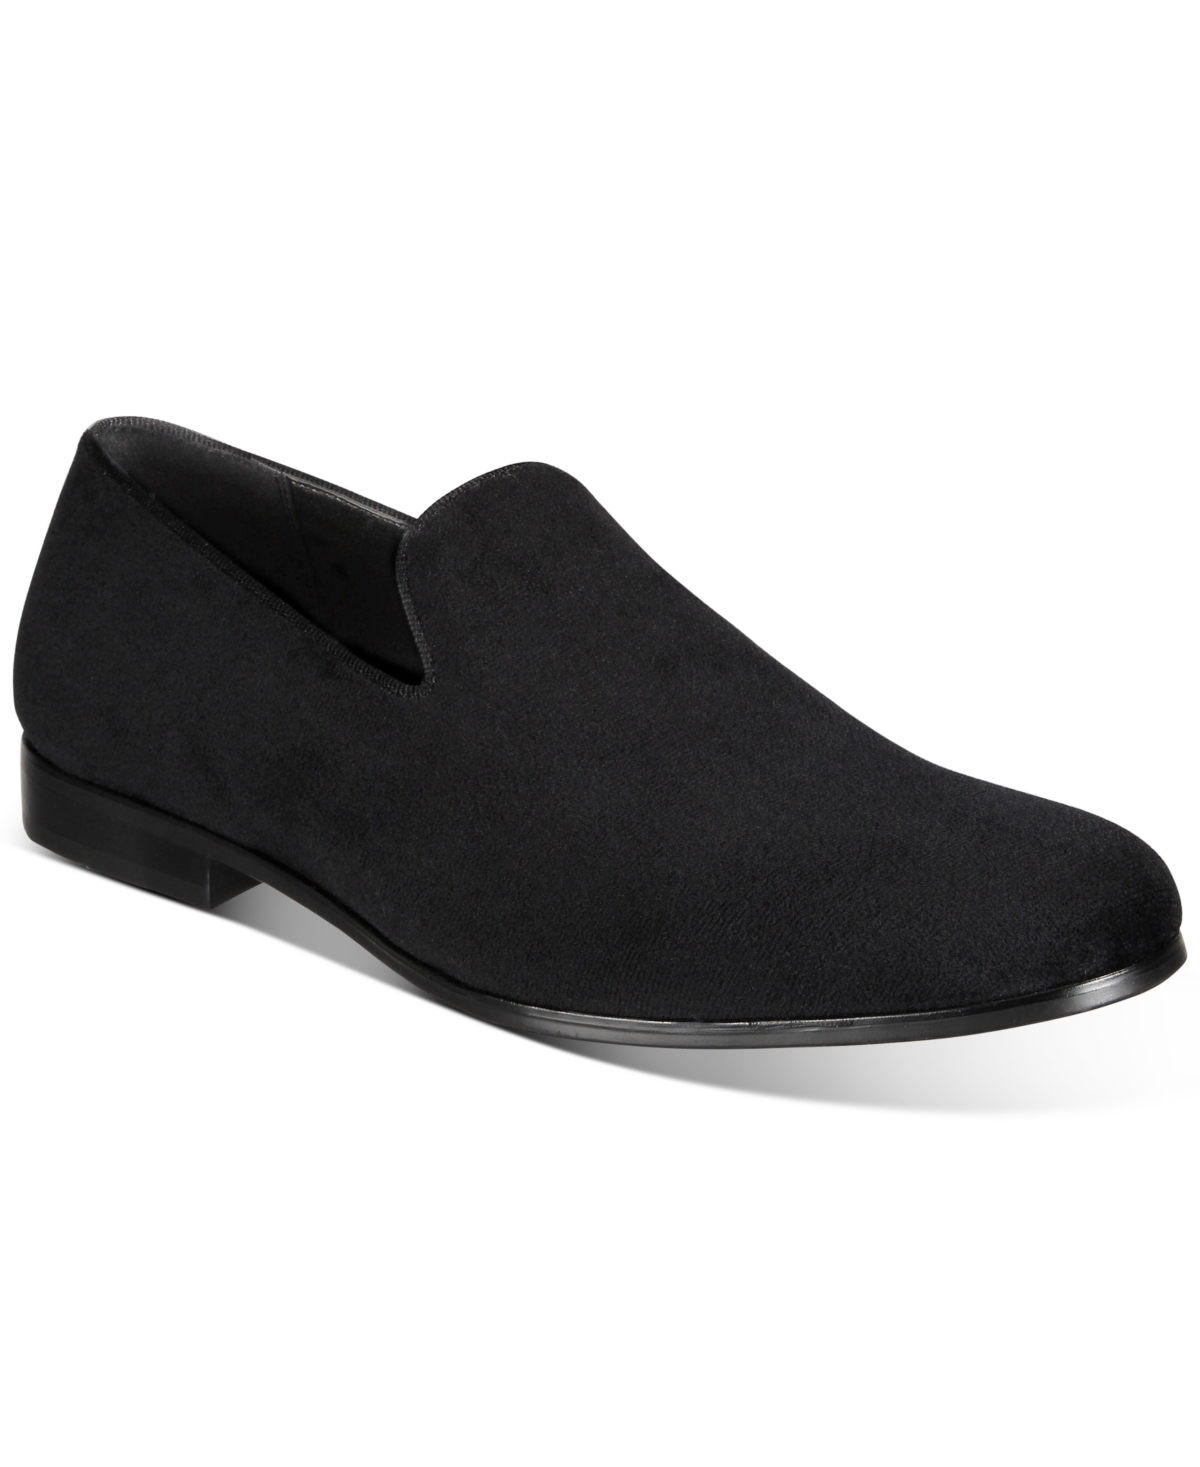 Men's Zion Smoking Slipper Loafers, Created for Macy's - Black